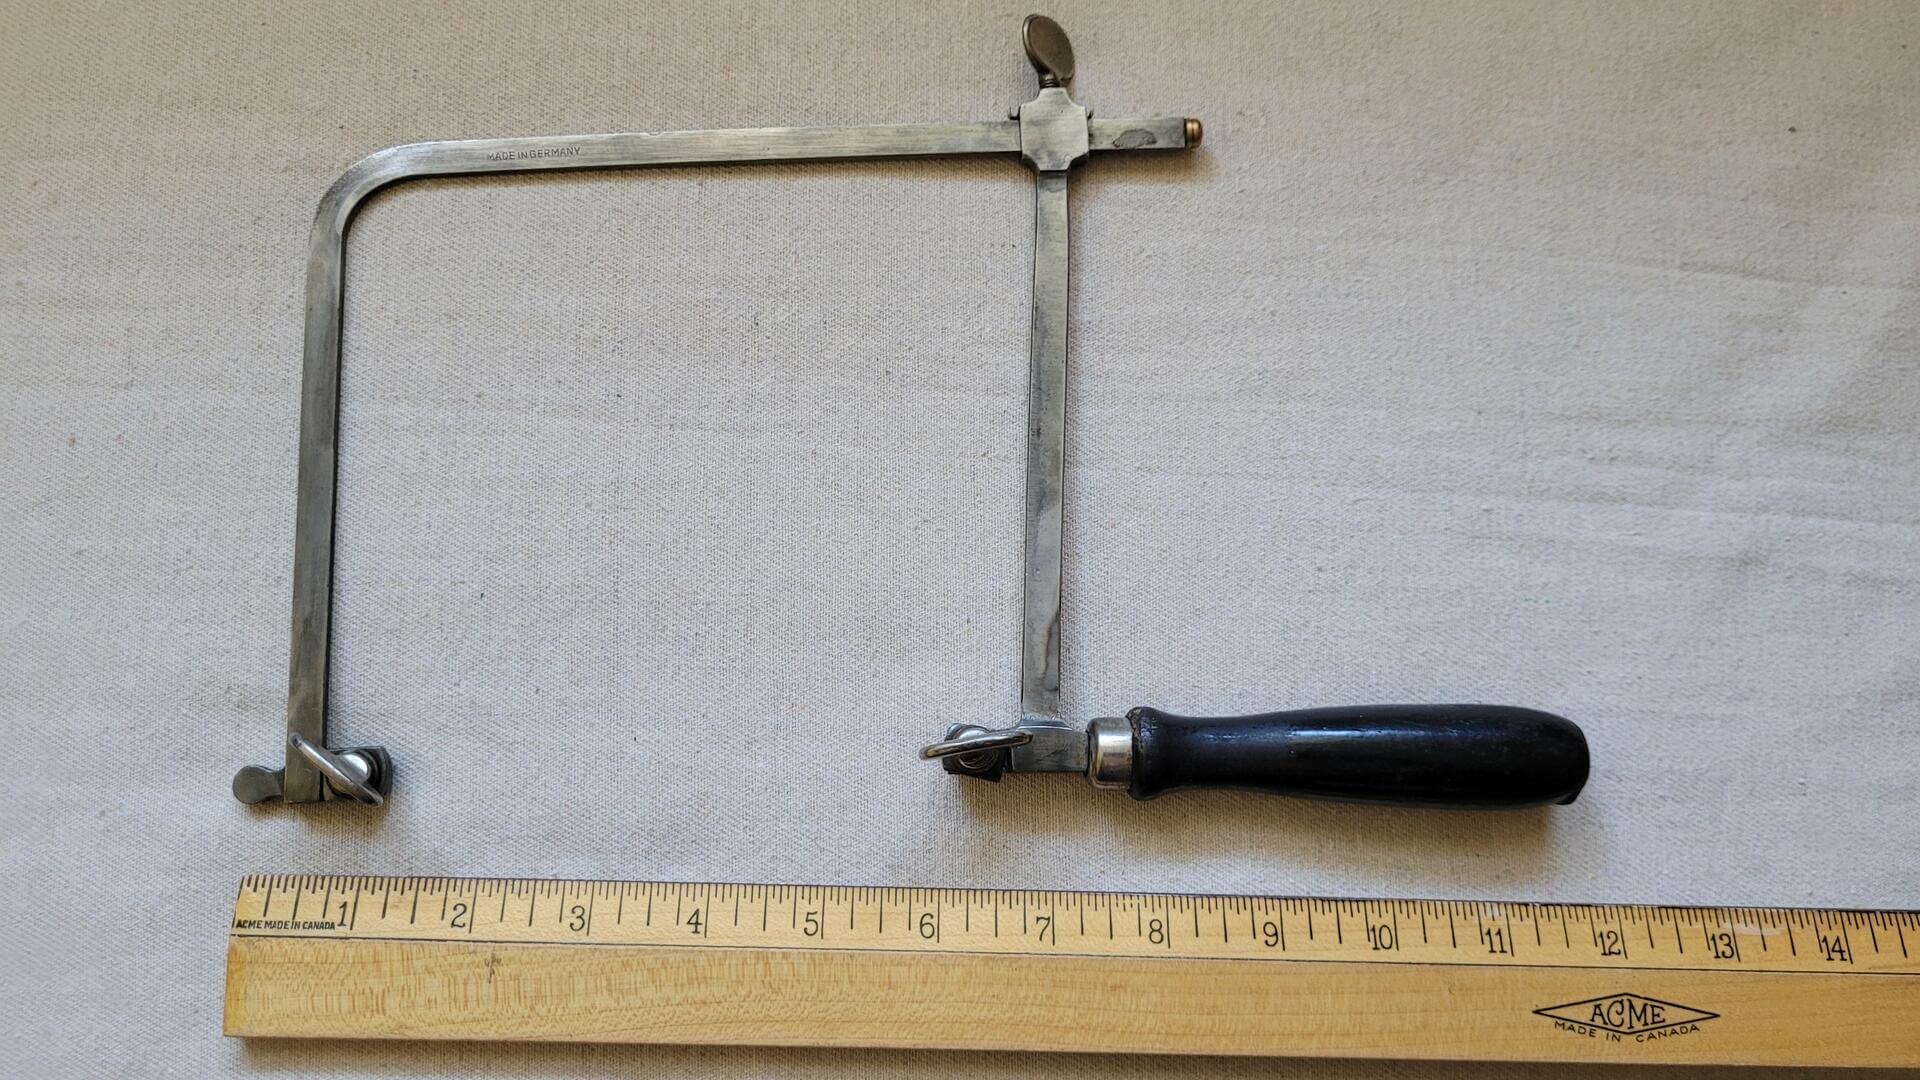 coping-saw-adjustable-fret-6-inches-wood-handle-made-in-germany-woodworking-jewelry-vintage-antique-collectible-cutting-tools-measurements